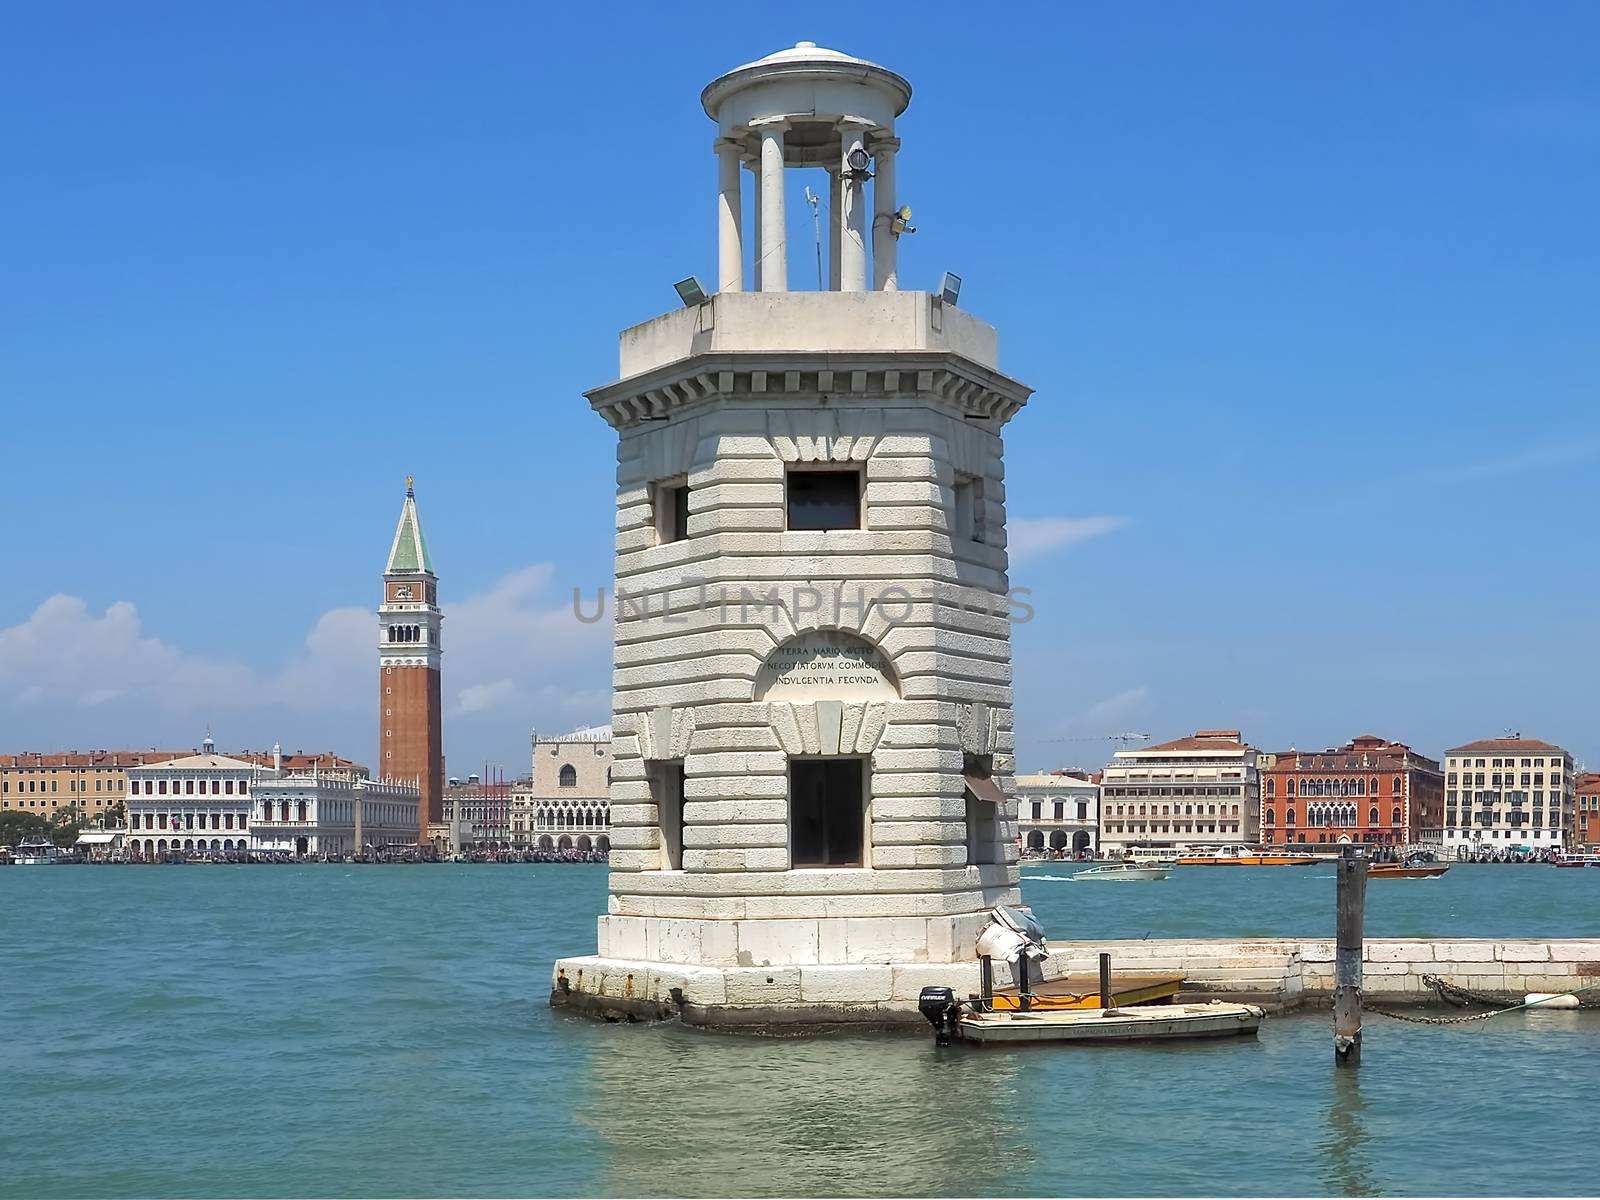 Lighthouse of Venice in Italy at the basilica della Salute by Stimmungsbilder